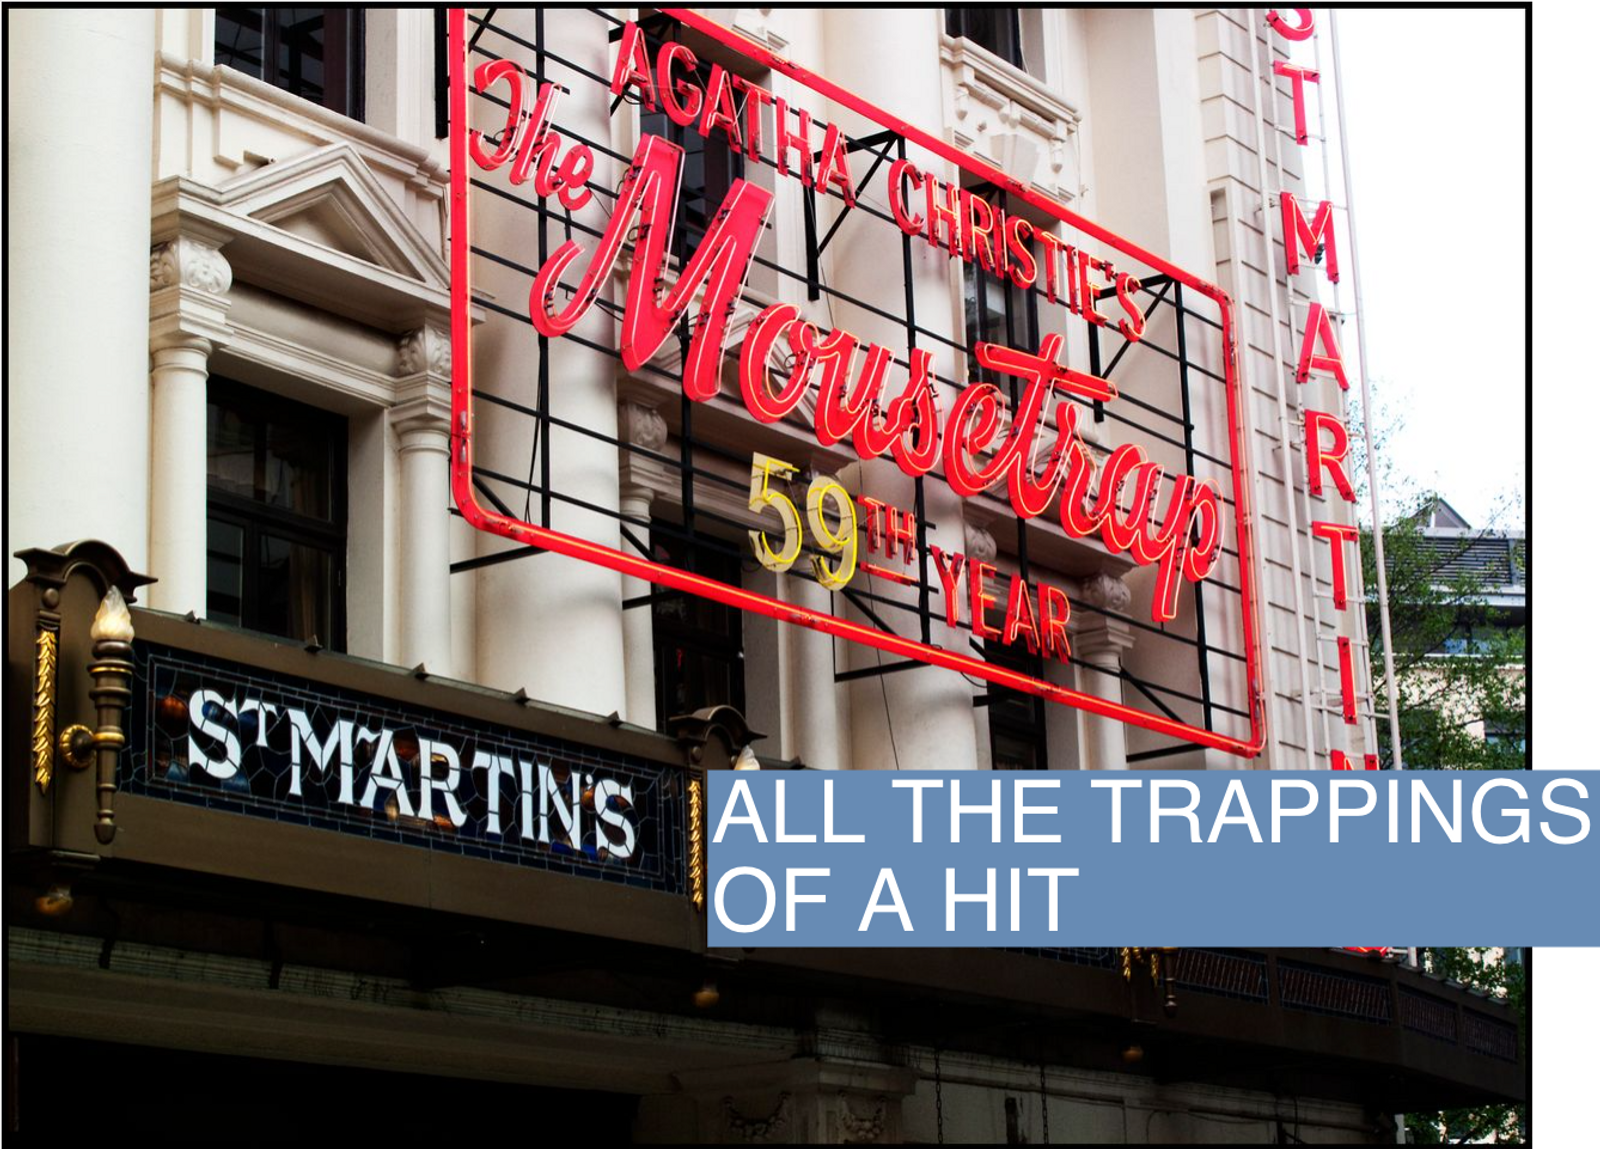 A neon sign advertising the 59th anniversary of The Mousetrap hangs above St. Martin's Theatre in London.